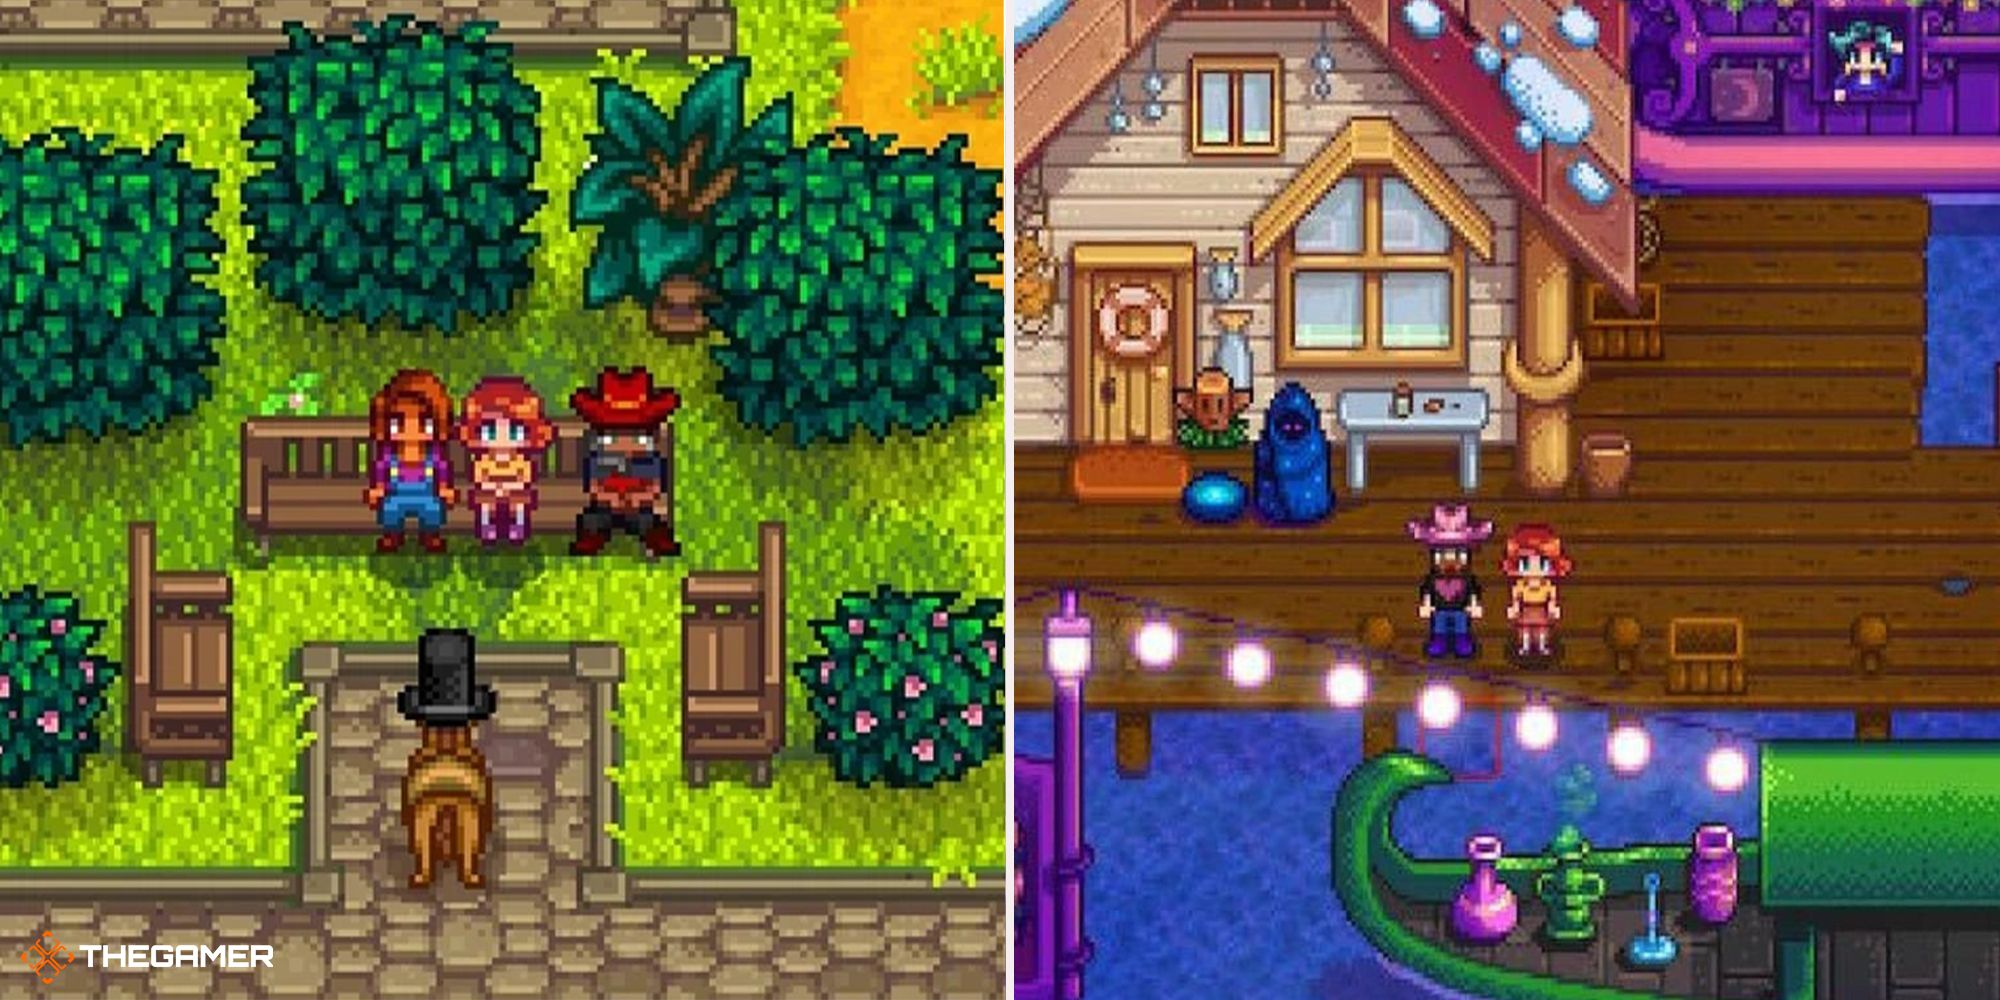 Stardew Valley - Penny at night market (right), penny on a bench (left)